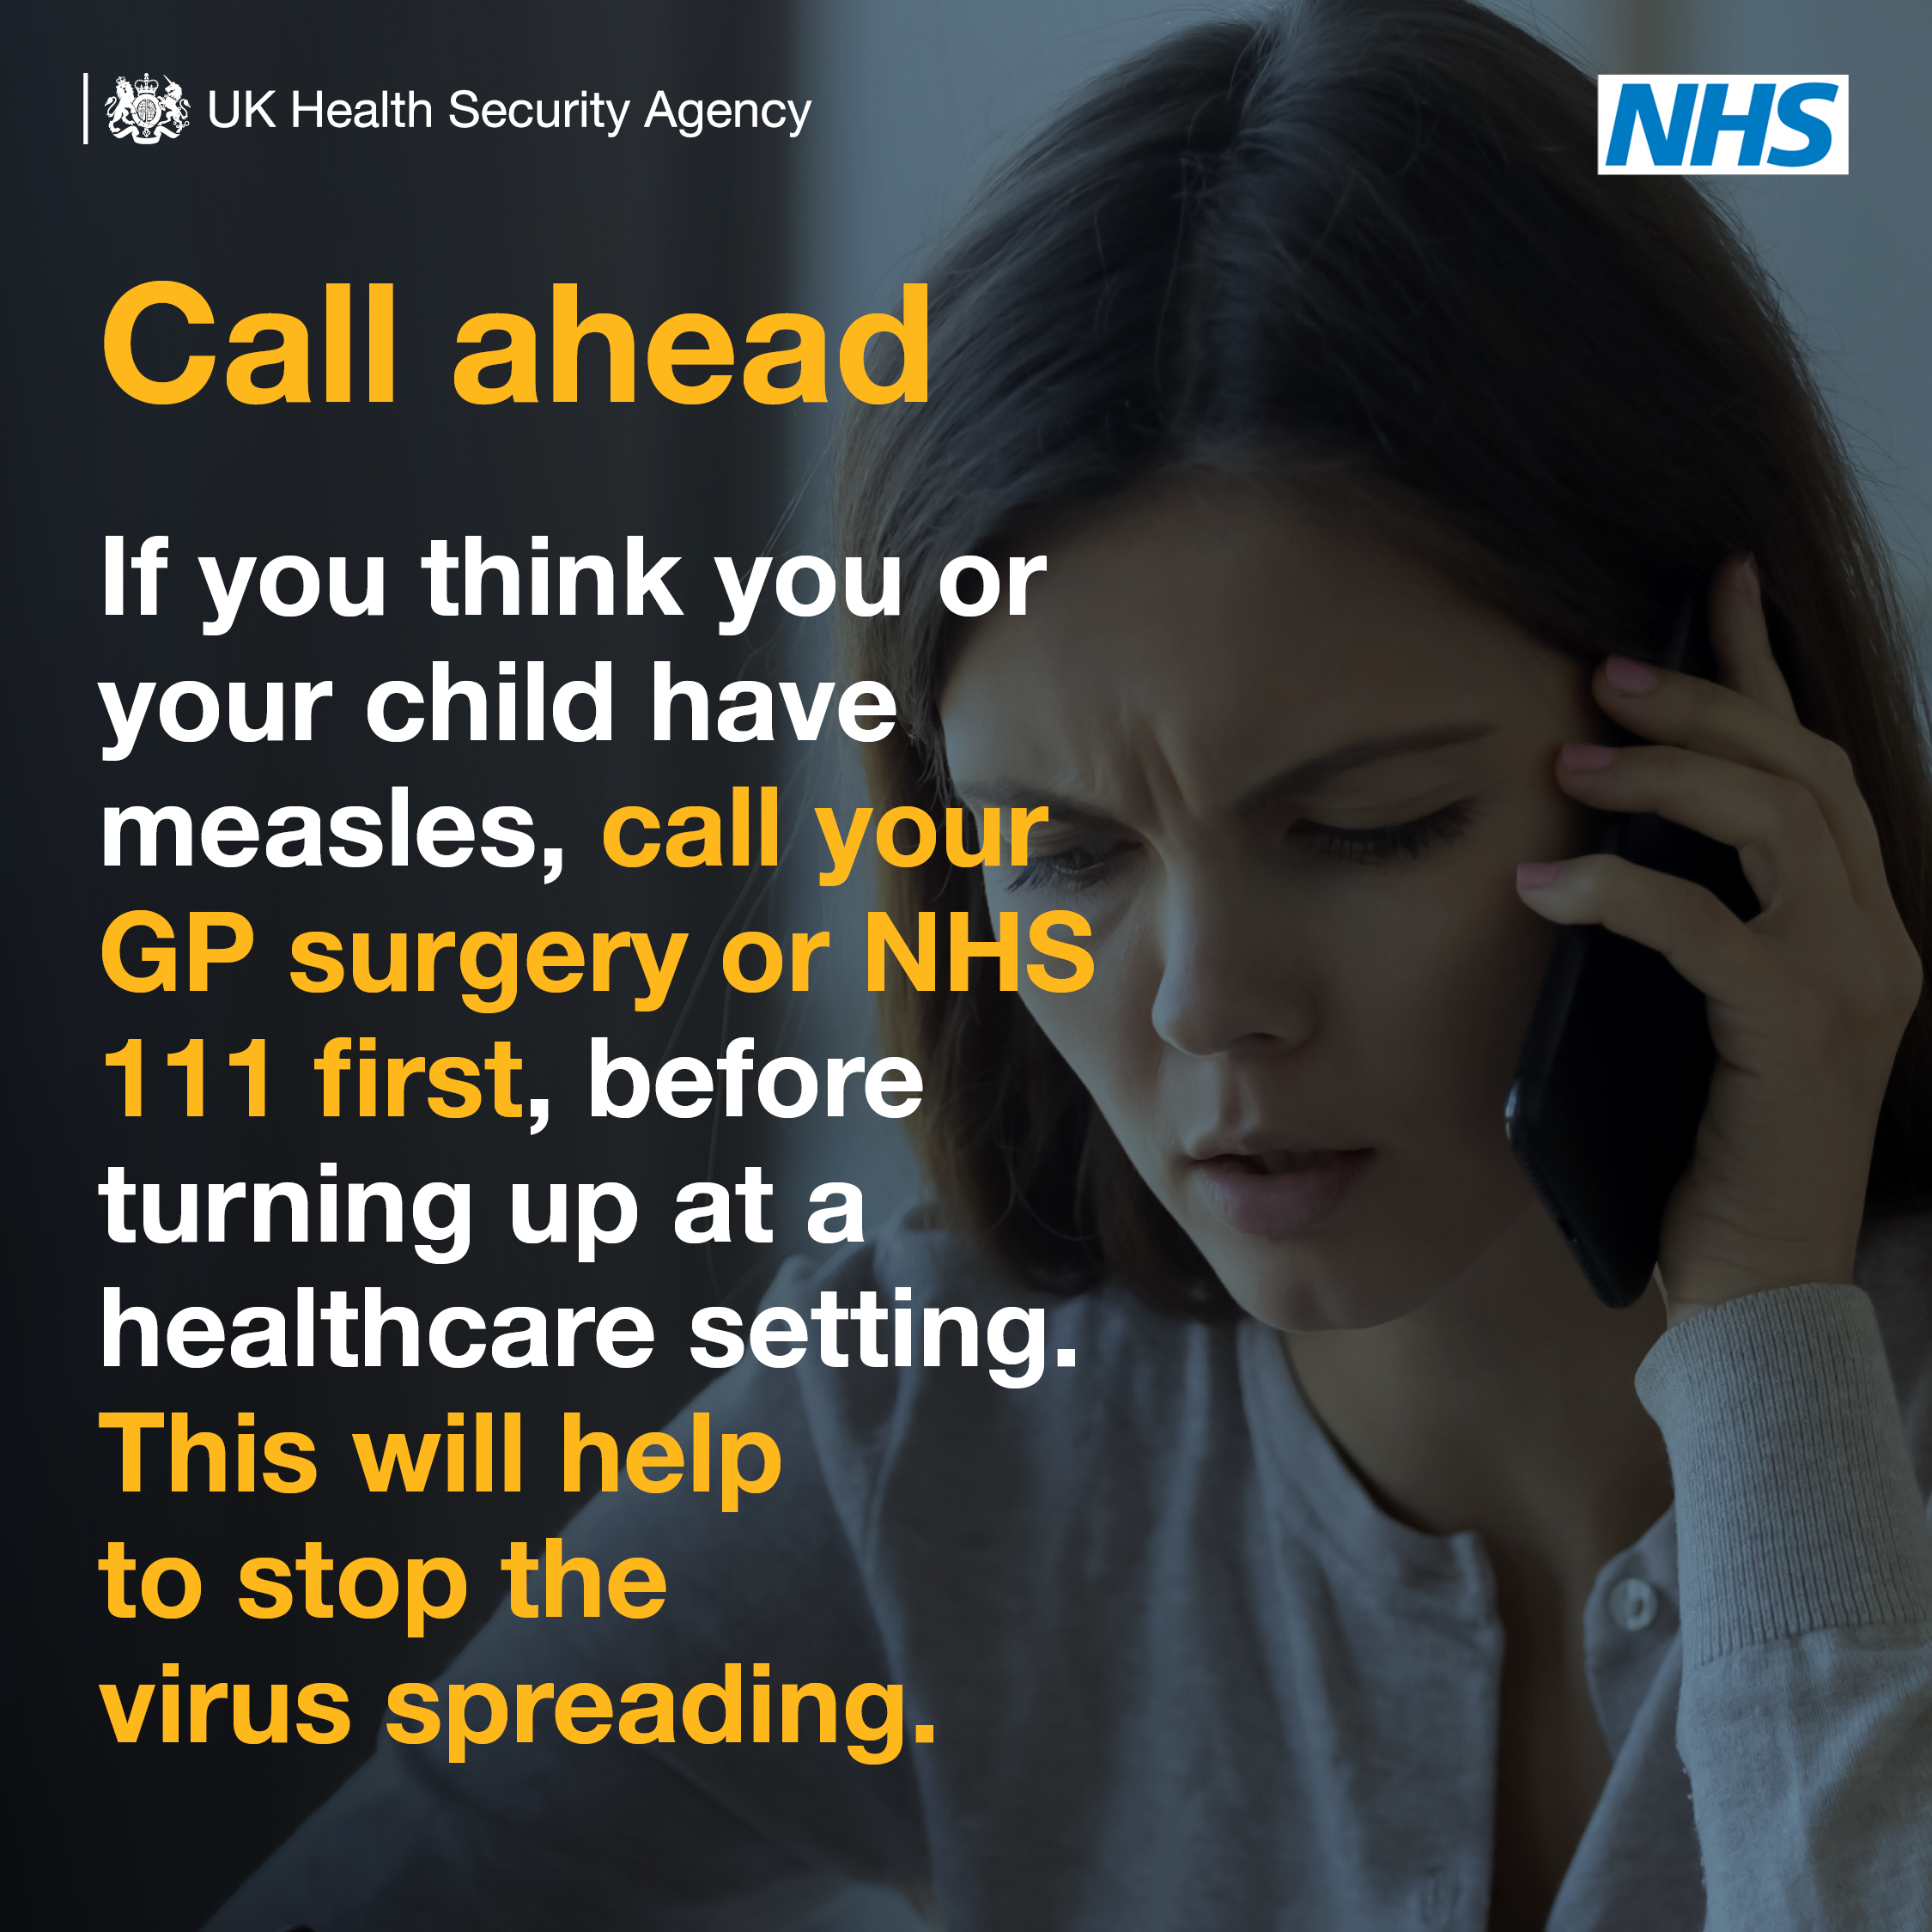 Image of someone on the phone with text overlaying the image saying 'Call ahead, If you think you or your child have measles, call your GP surgery or NHS 111 first, before turning up at a healthcare setting. This will help to stop the virus spreading. 